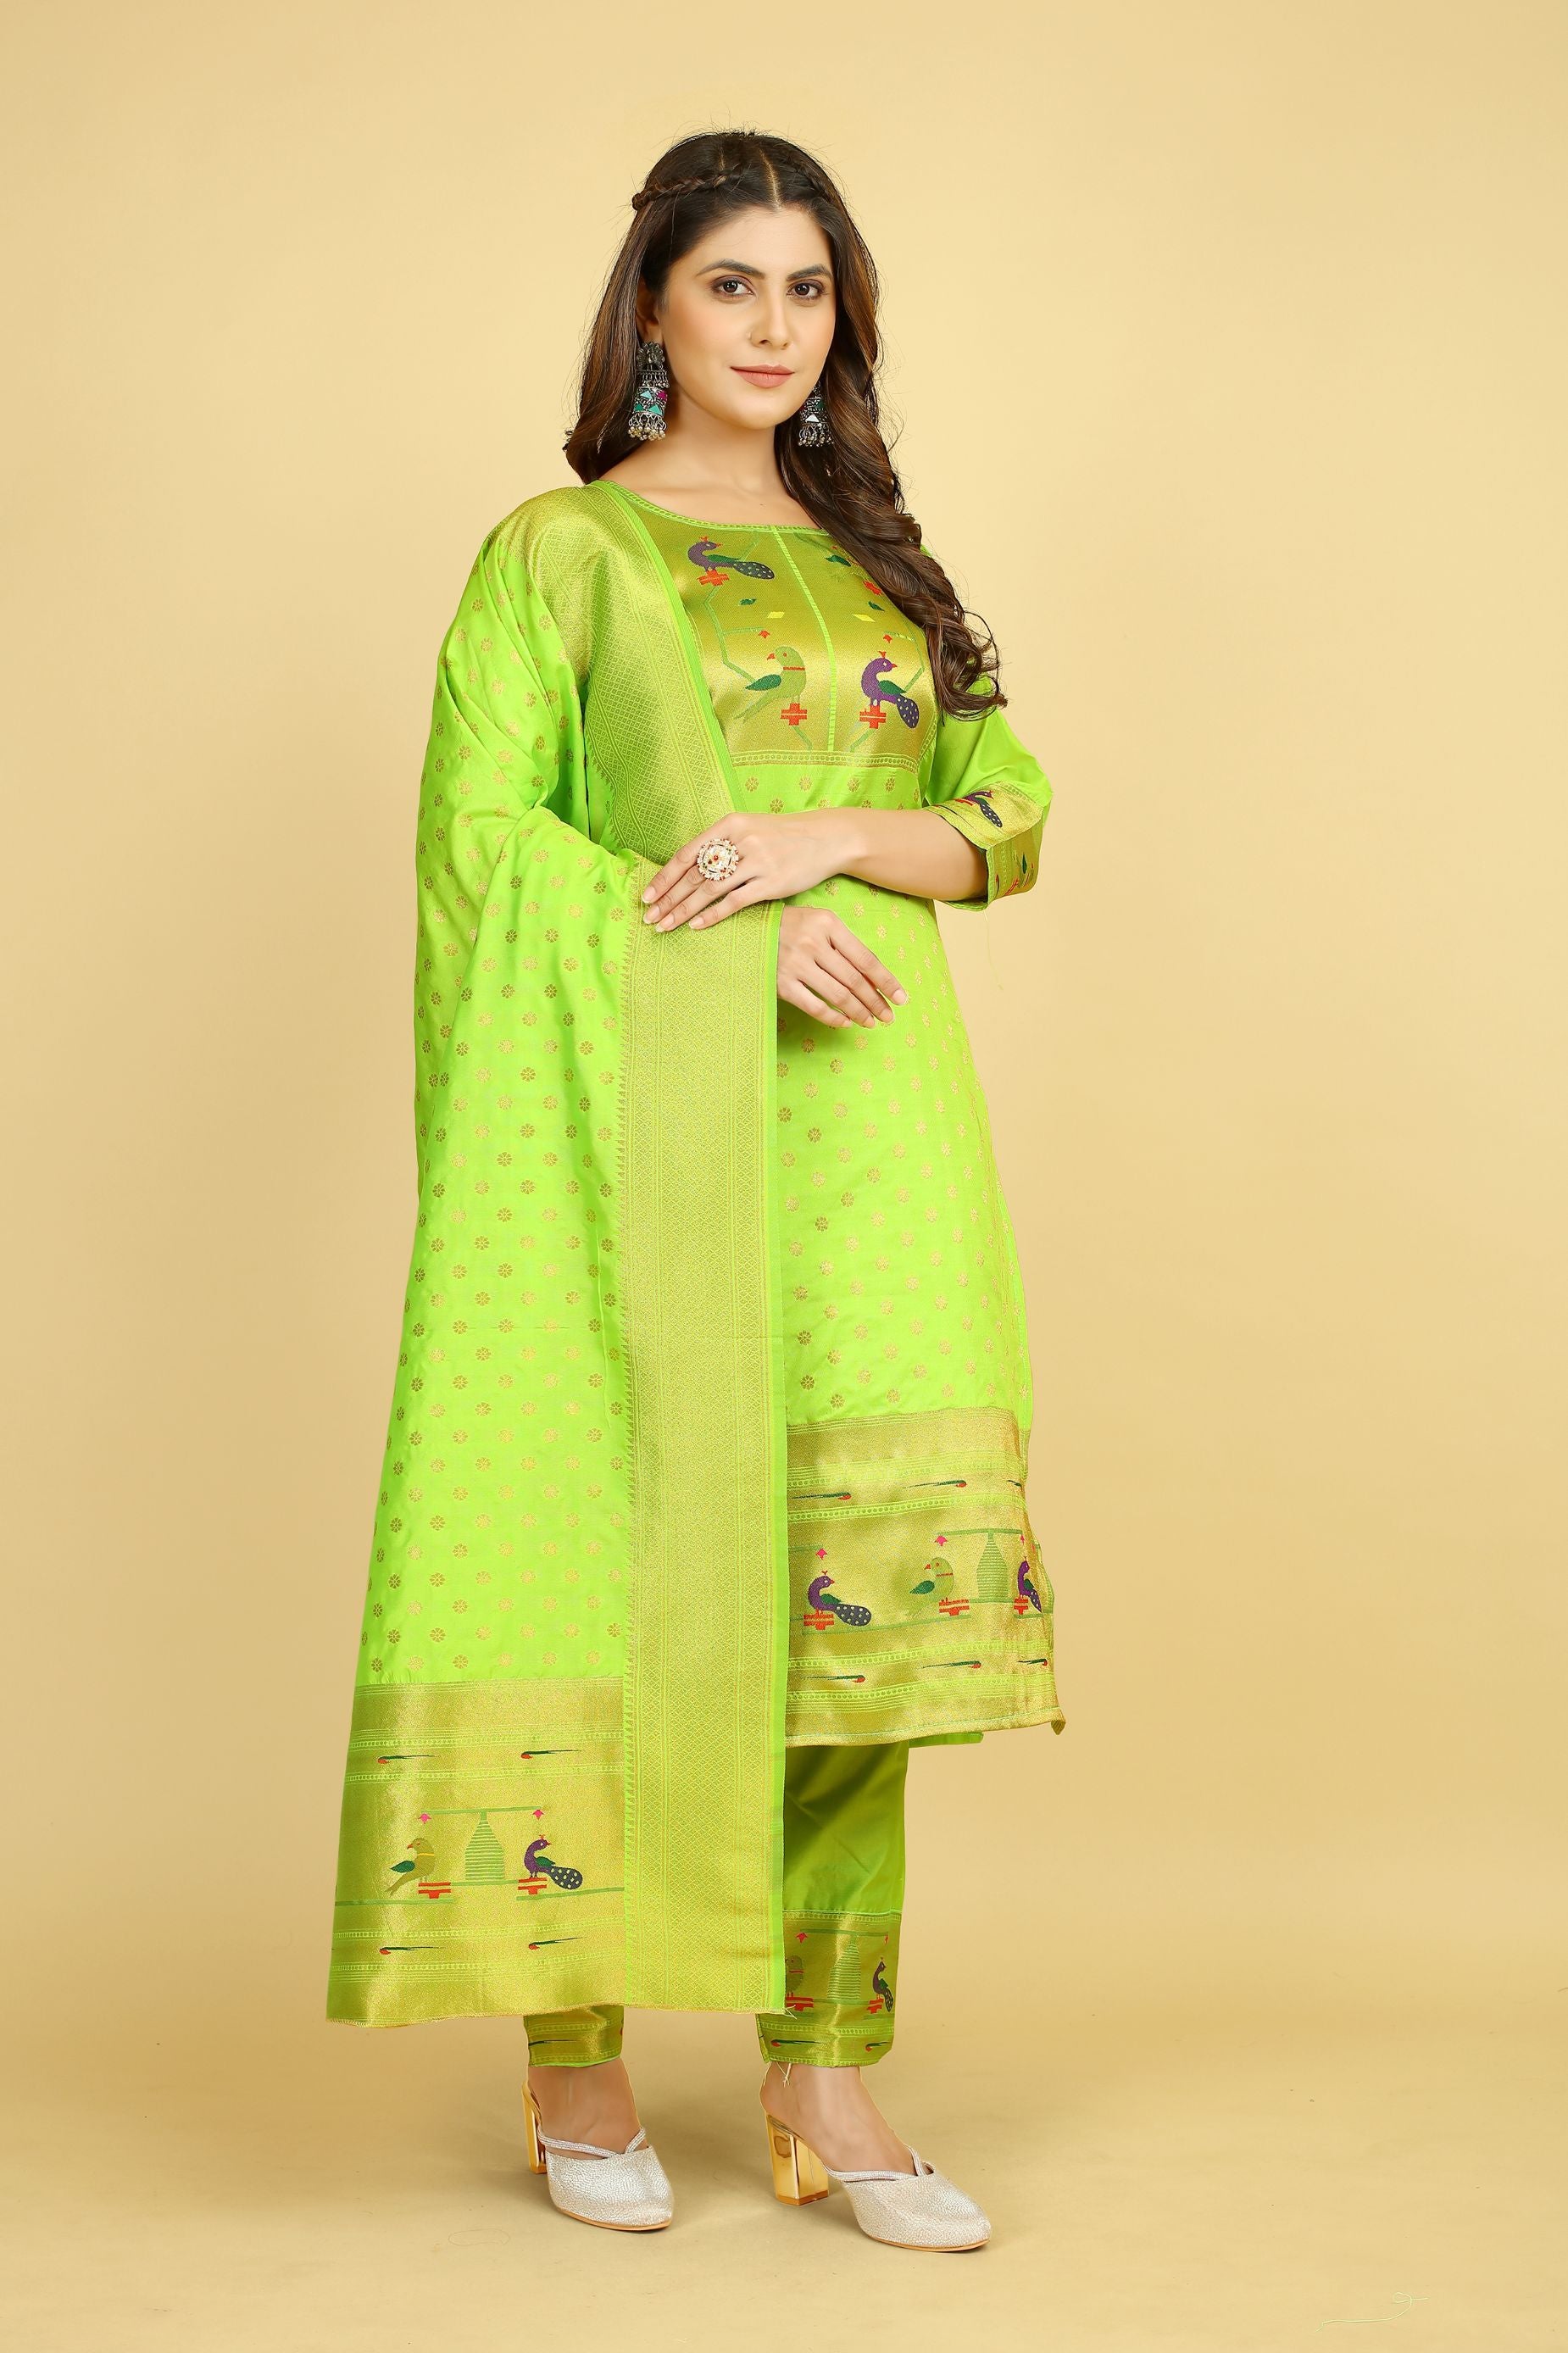 Lemon Green Color latest indian suits fashion in zari weaving work suits in Paithani Style